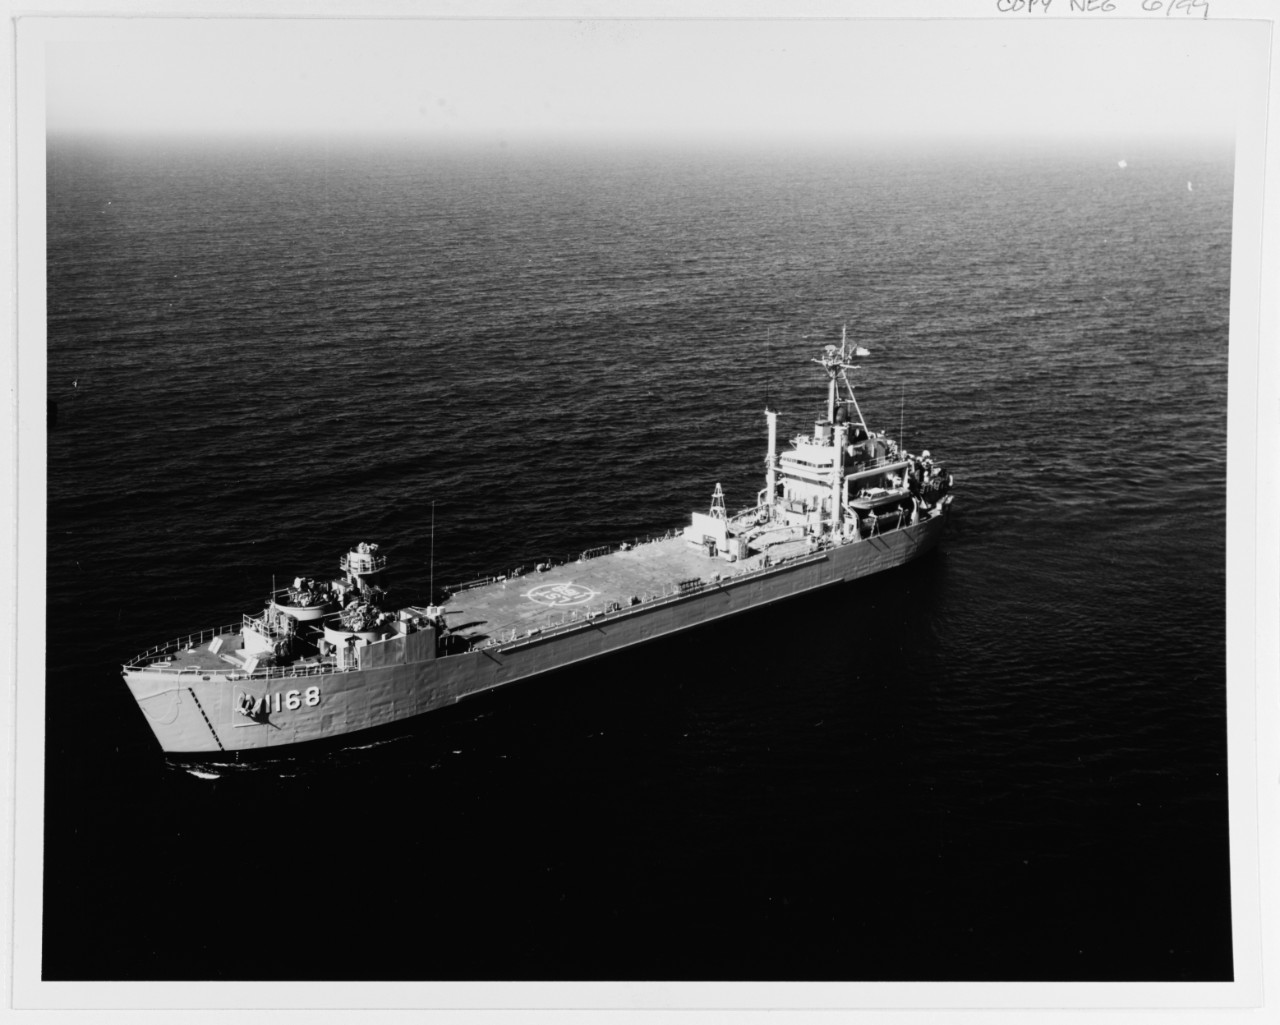 USS WEXFORD COUNTRY (LST-1168)